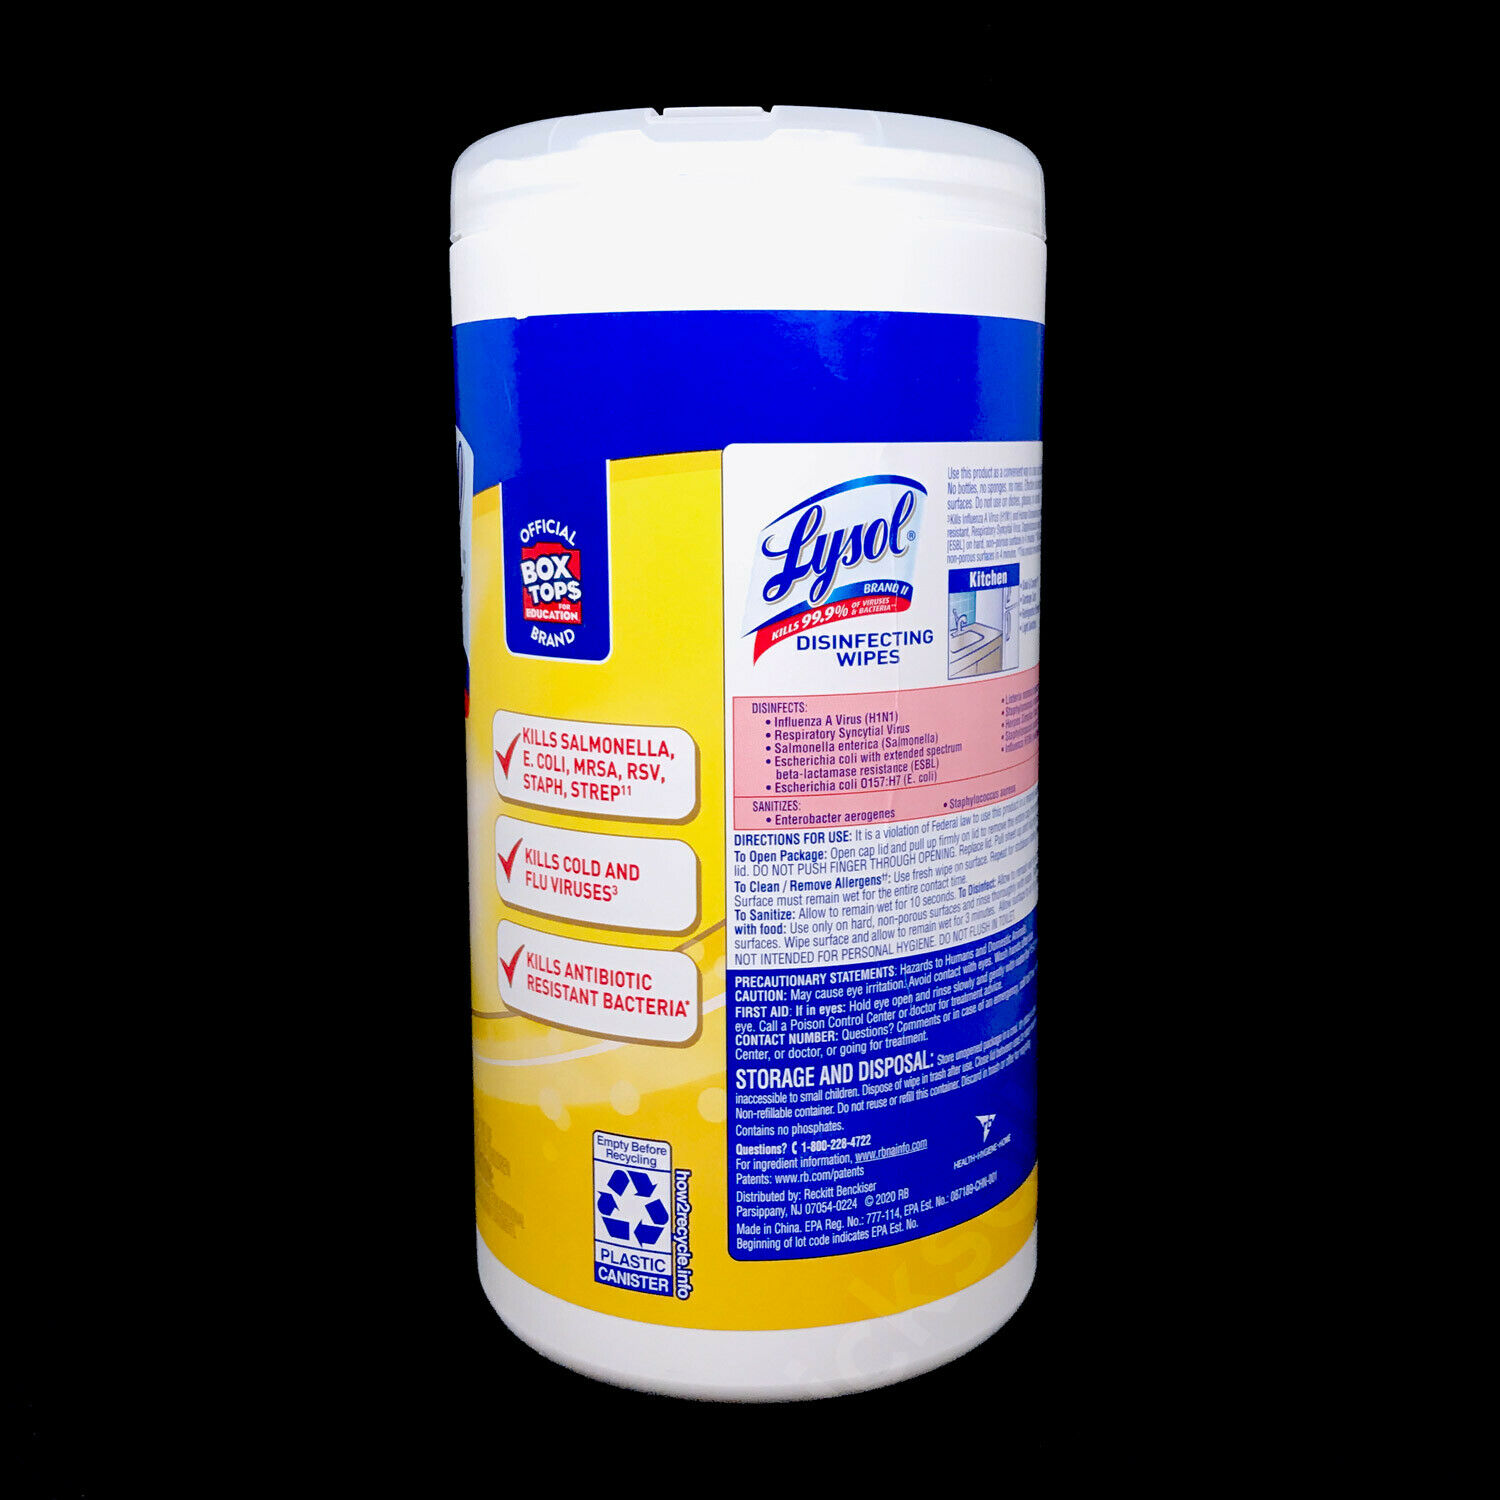 Lysol Disinfecting Wipes 80 count lemon & lime blossom scent